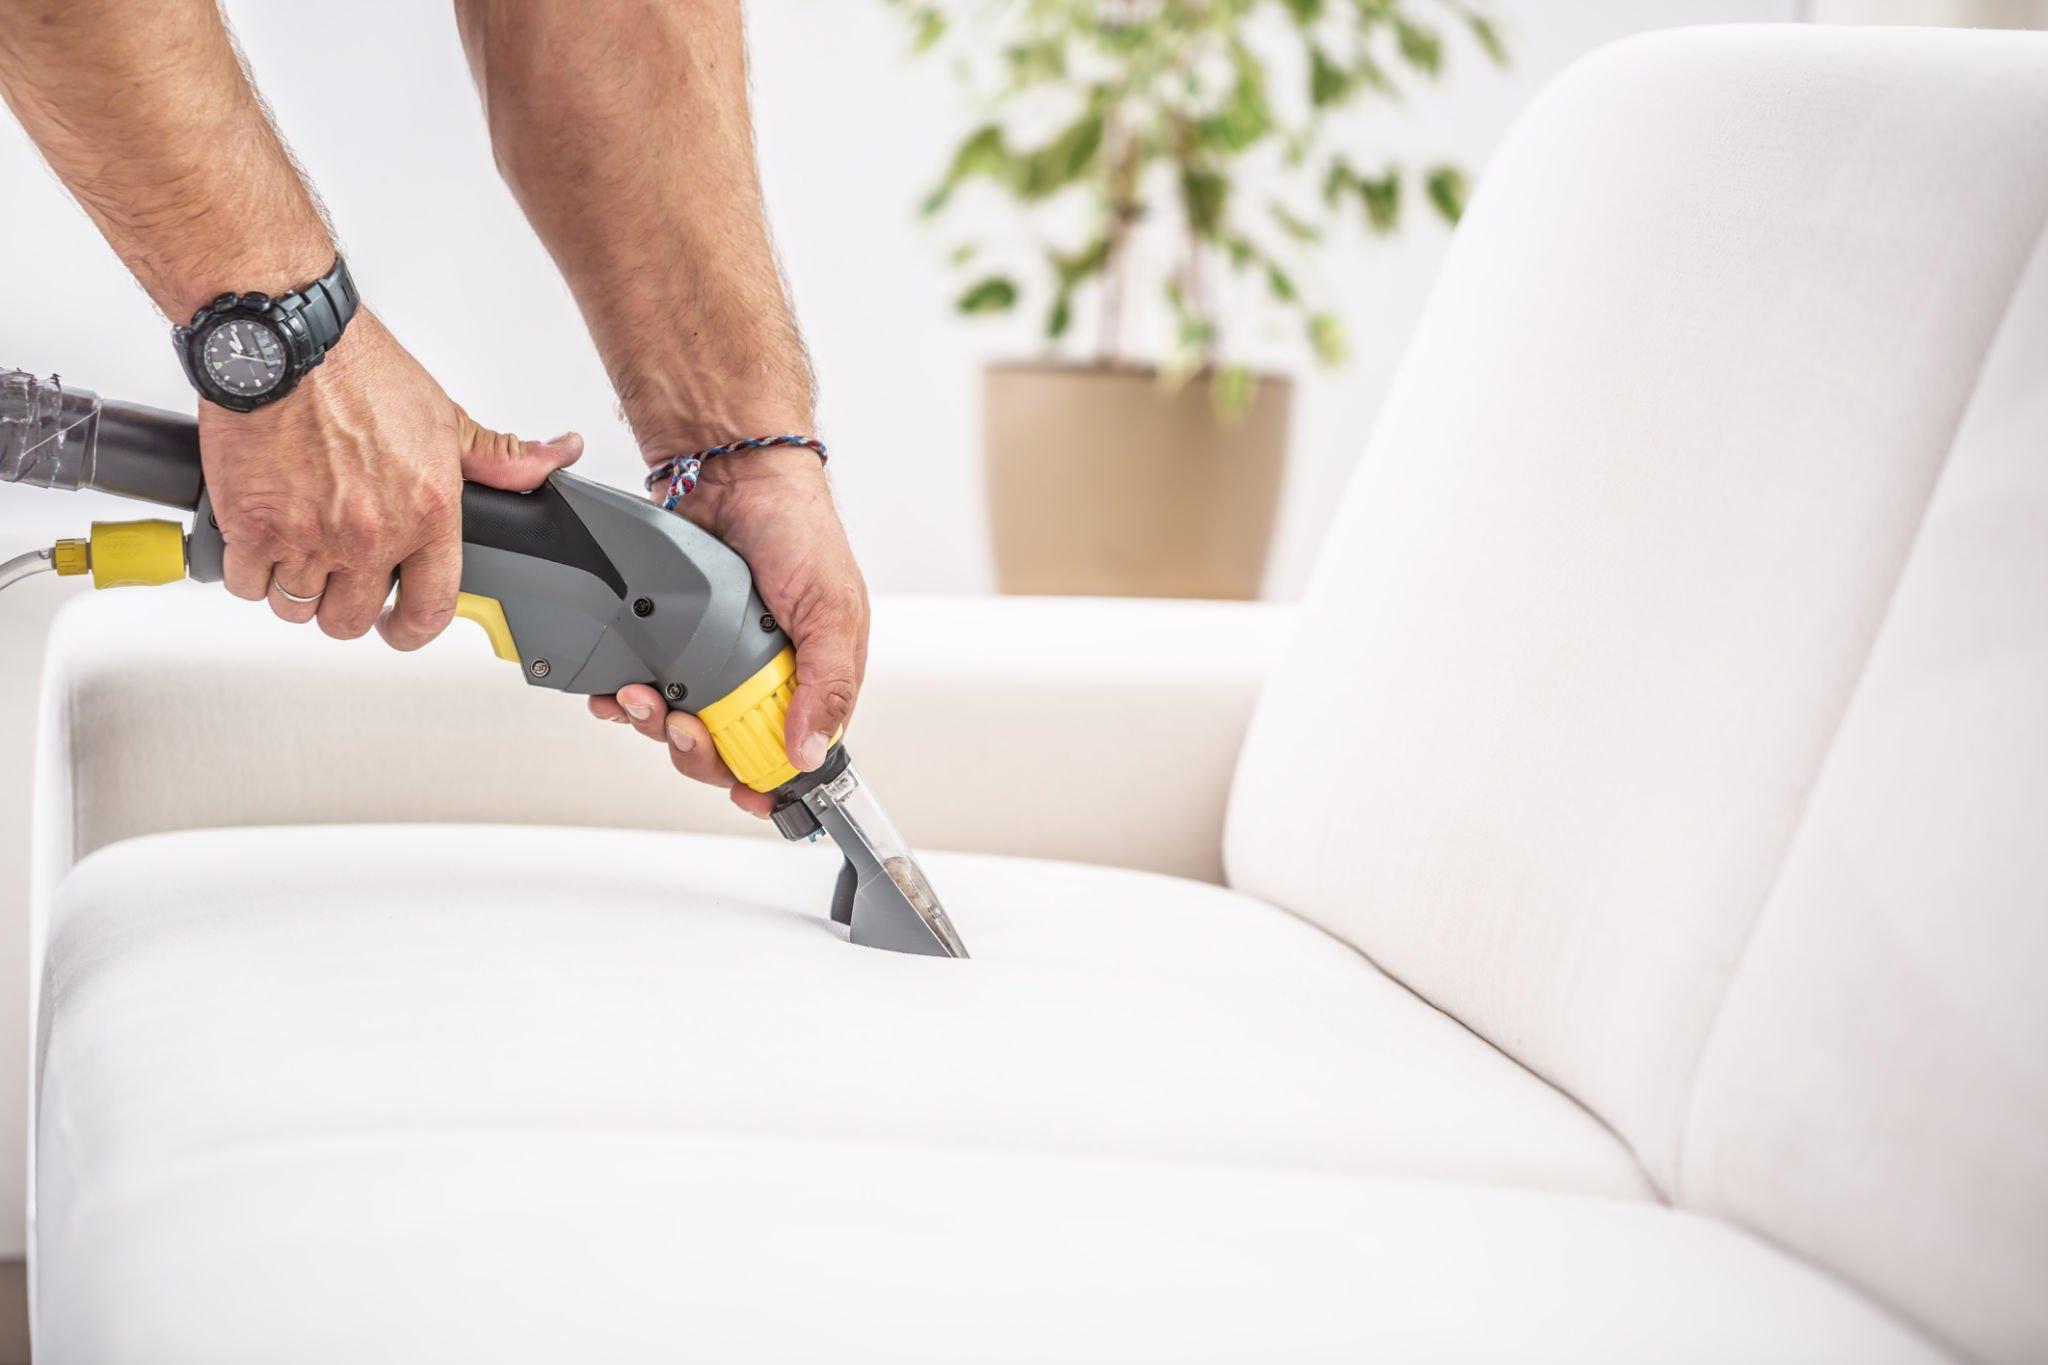 Clean bedding and upholstery